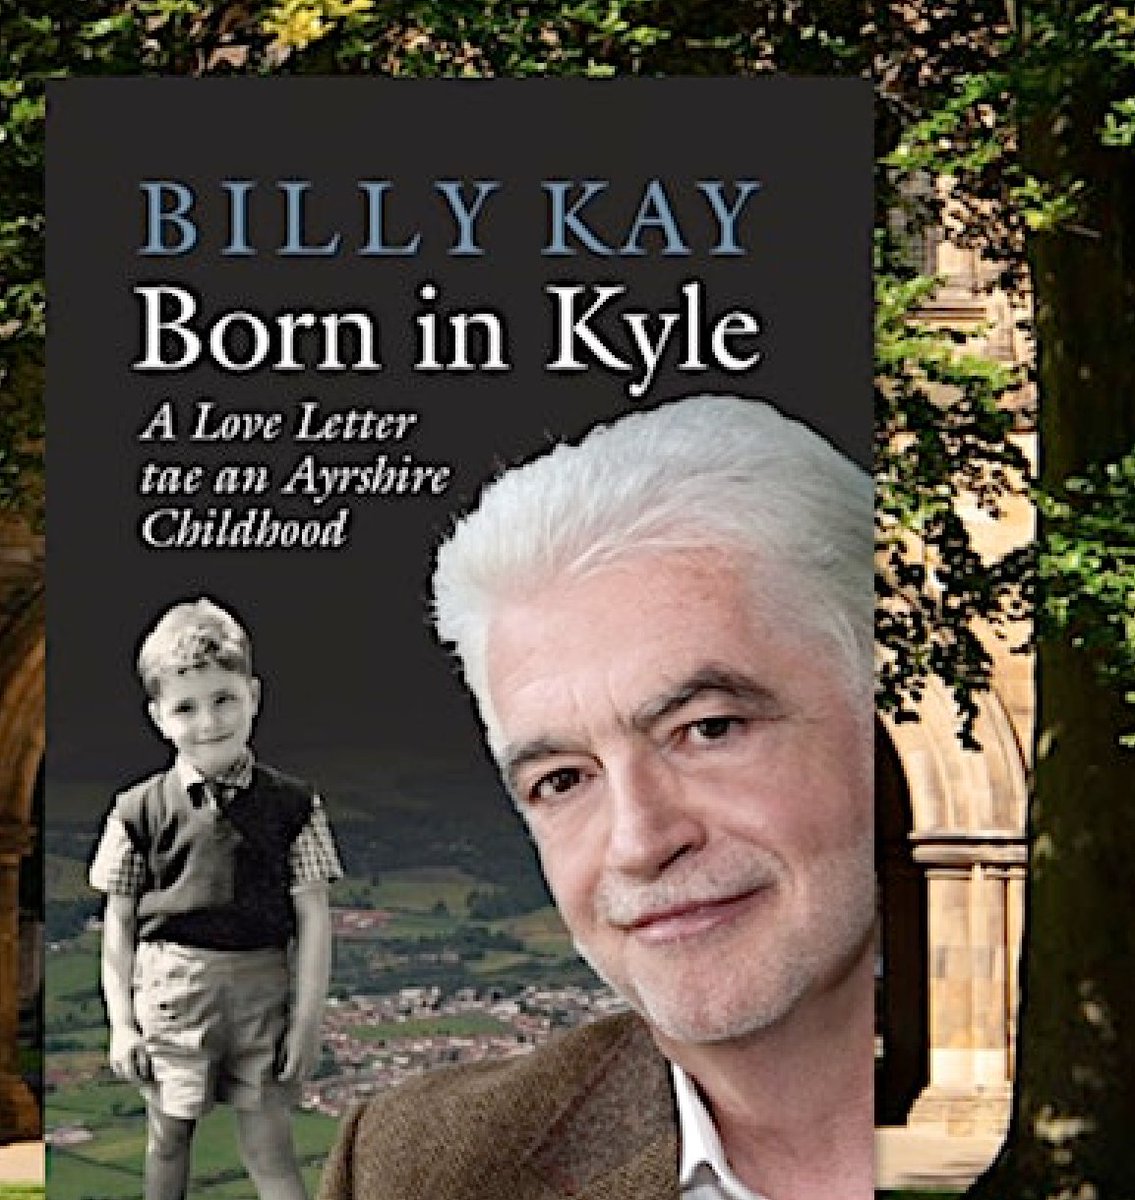 It was rerr chatting to @billykayscot on our podcast. Jim and Pat's West End Chat - you can catch Billy at the Boswell Book Festival on Saturday 11 May @bozzyfest podbean.com/ew/pb-hjak5-16…